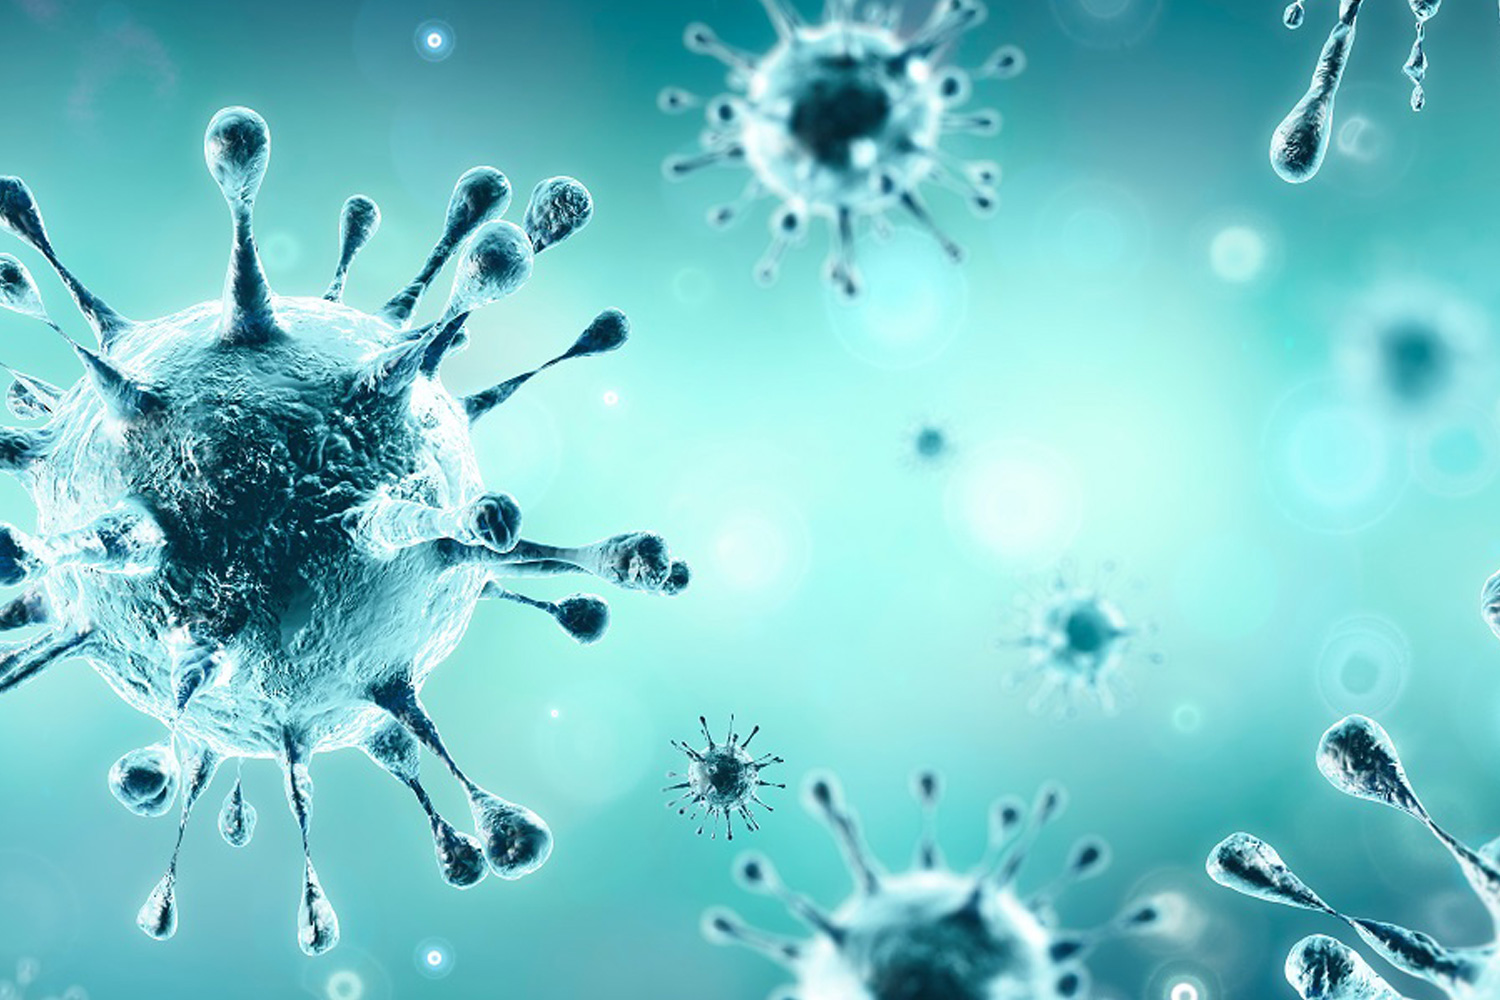 The 9th wave of new coronavirus infections is now prevalent.